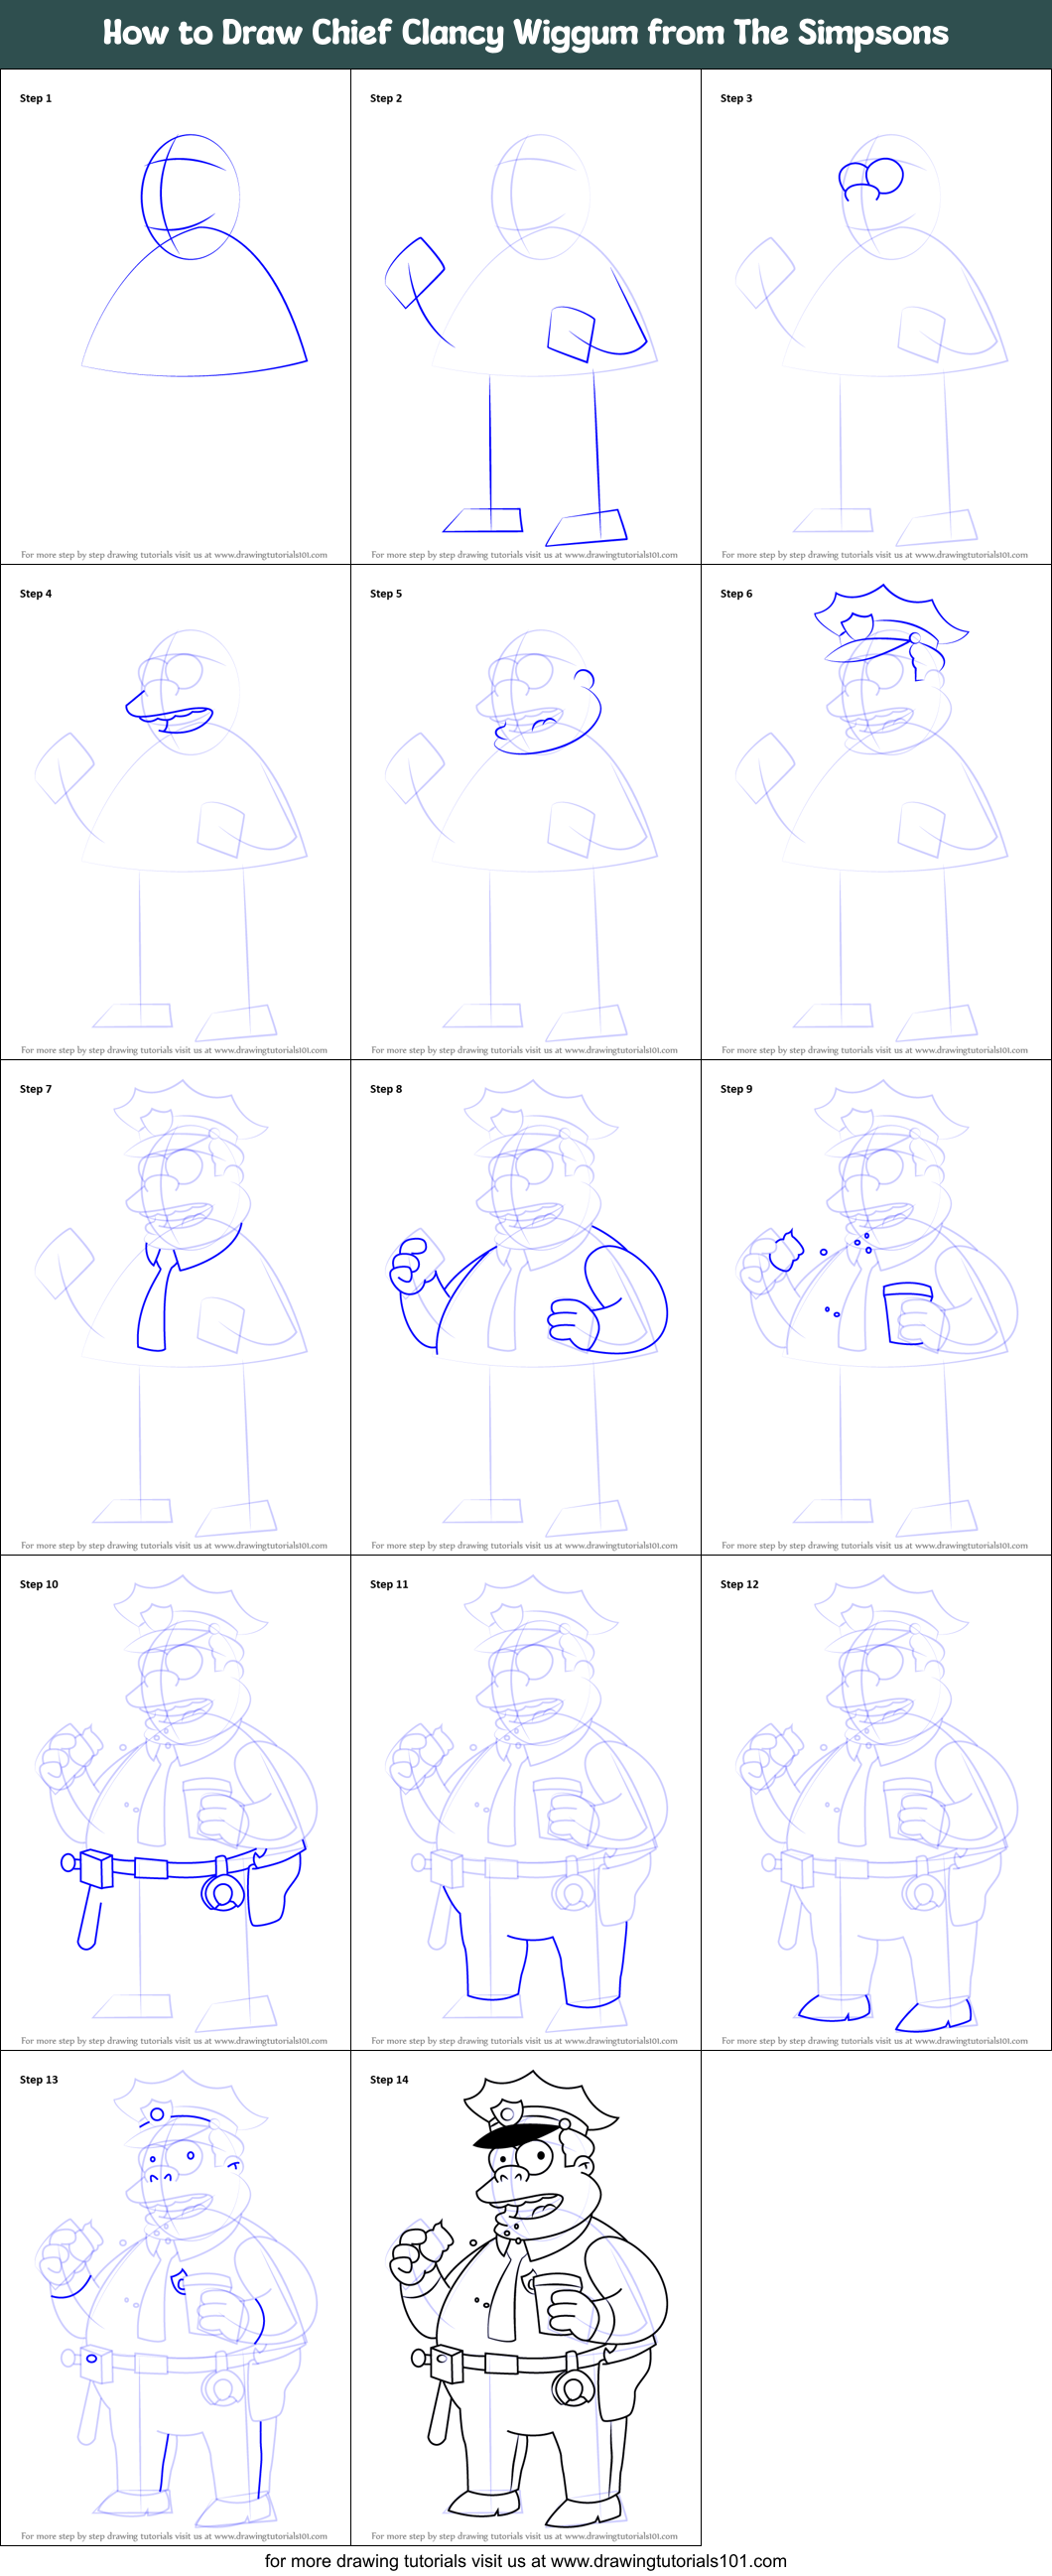 How to draw Ralph Wiggum picking his nose - Step by step drawing tutorials